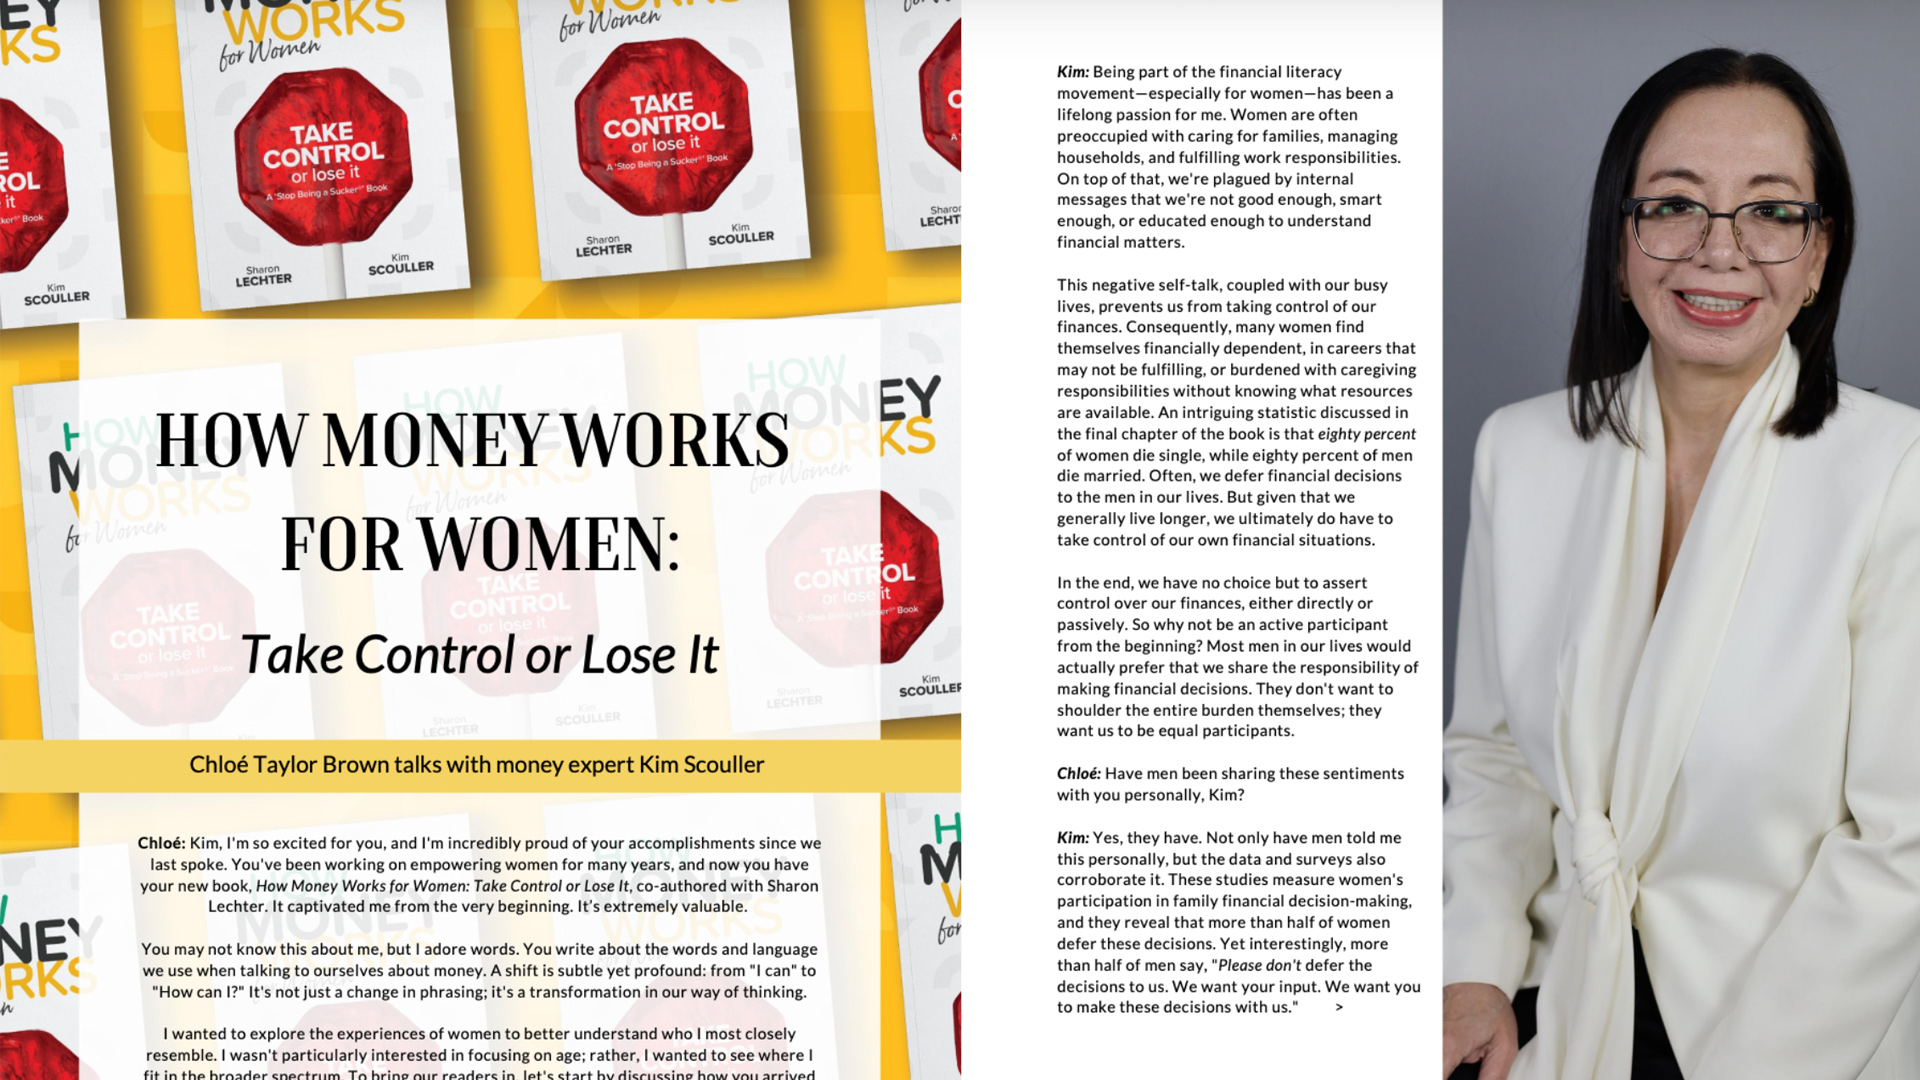 New Interview with Kim Scouller in Flourish Magazine about "HowMoneyWorks: Take Control or Lose It"